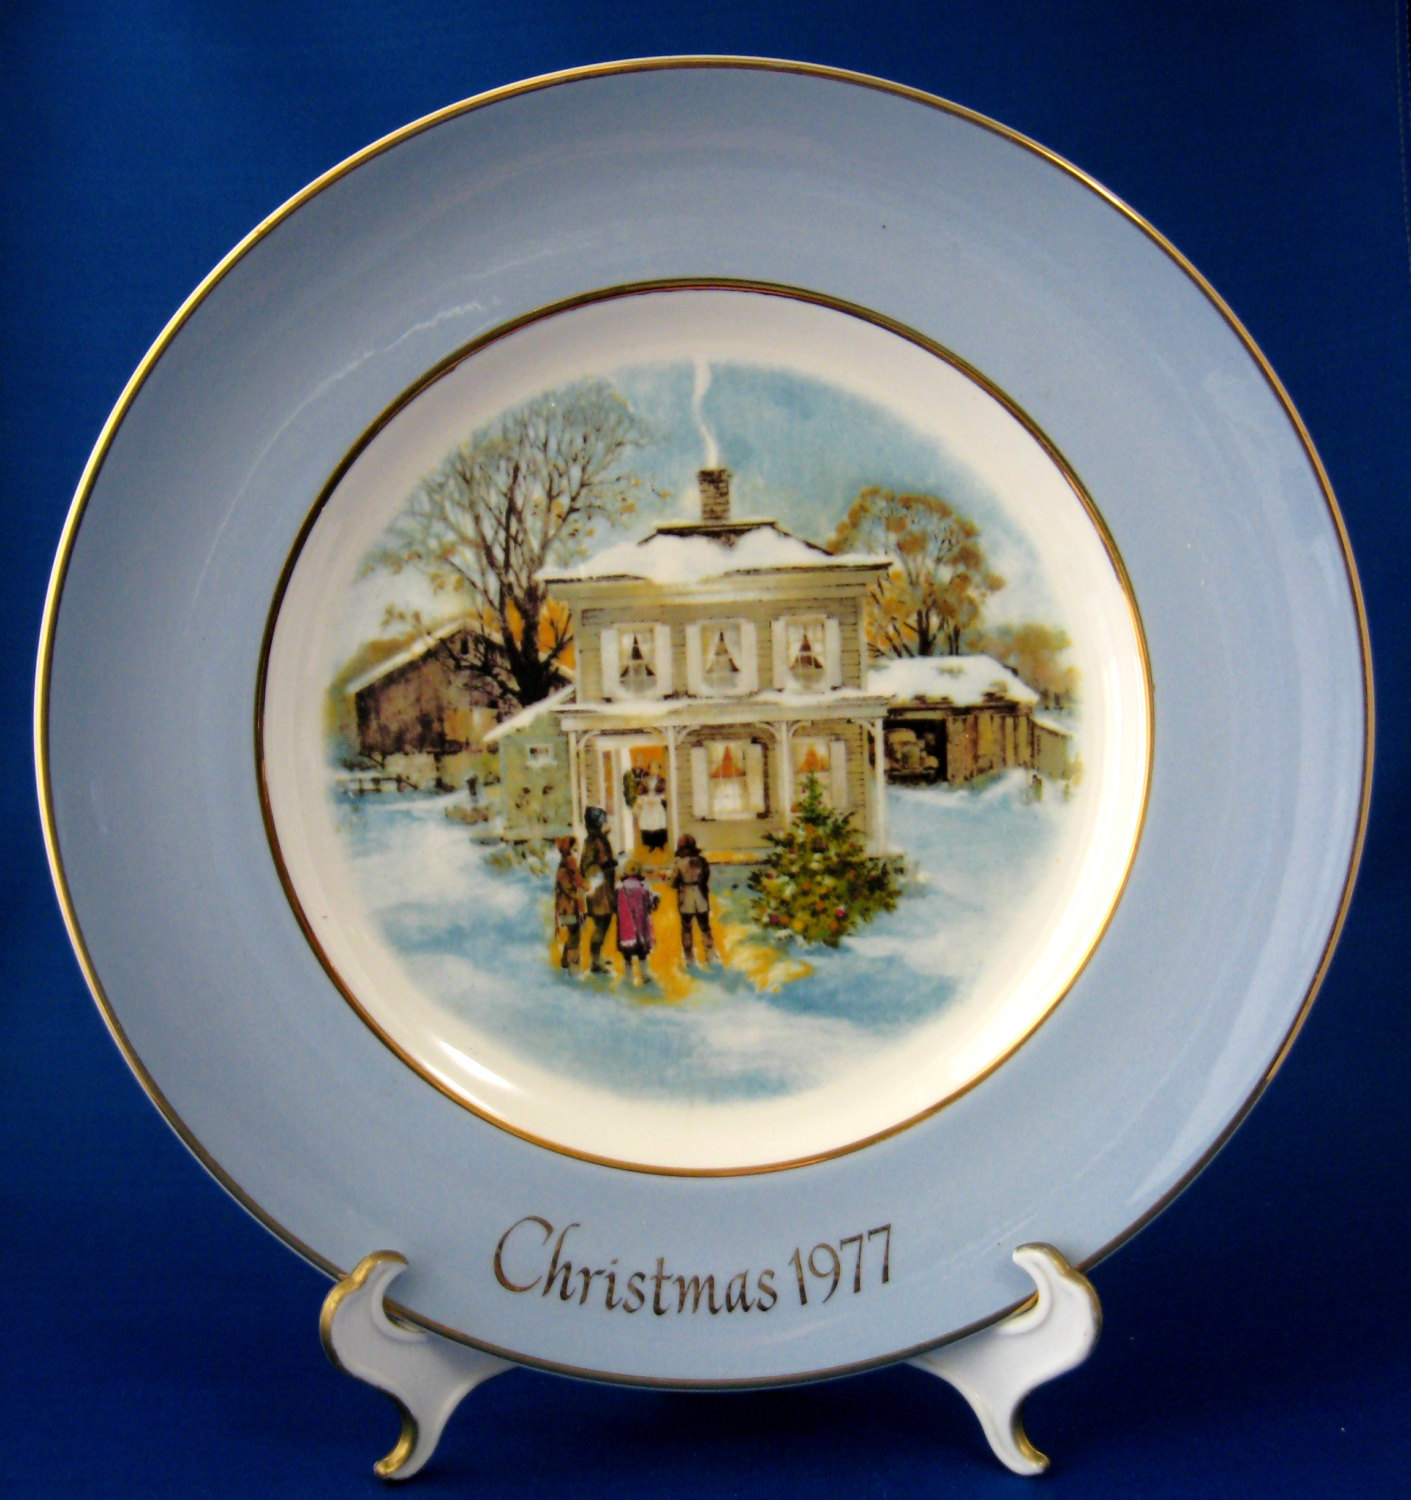 1977 AVON CHRISTMAS PLATE Carollers in the Snow Wedgewood for Avon Plate with Original Box Avon Collectible Plate